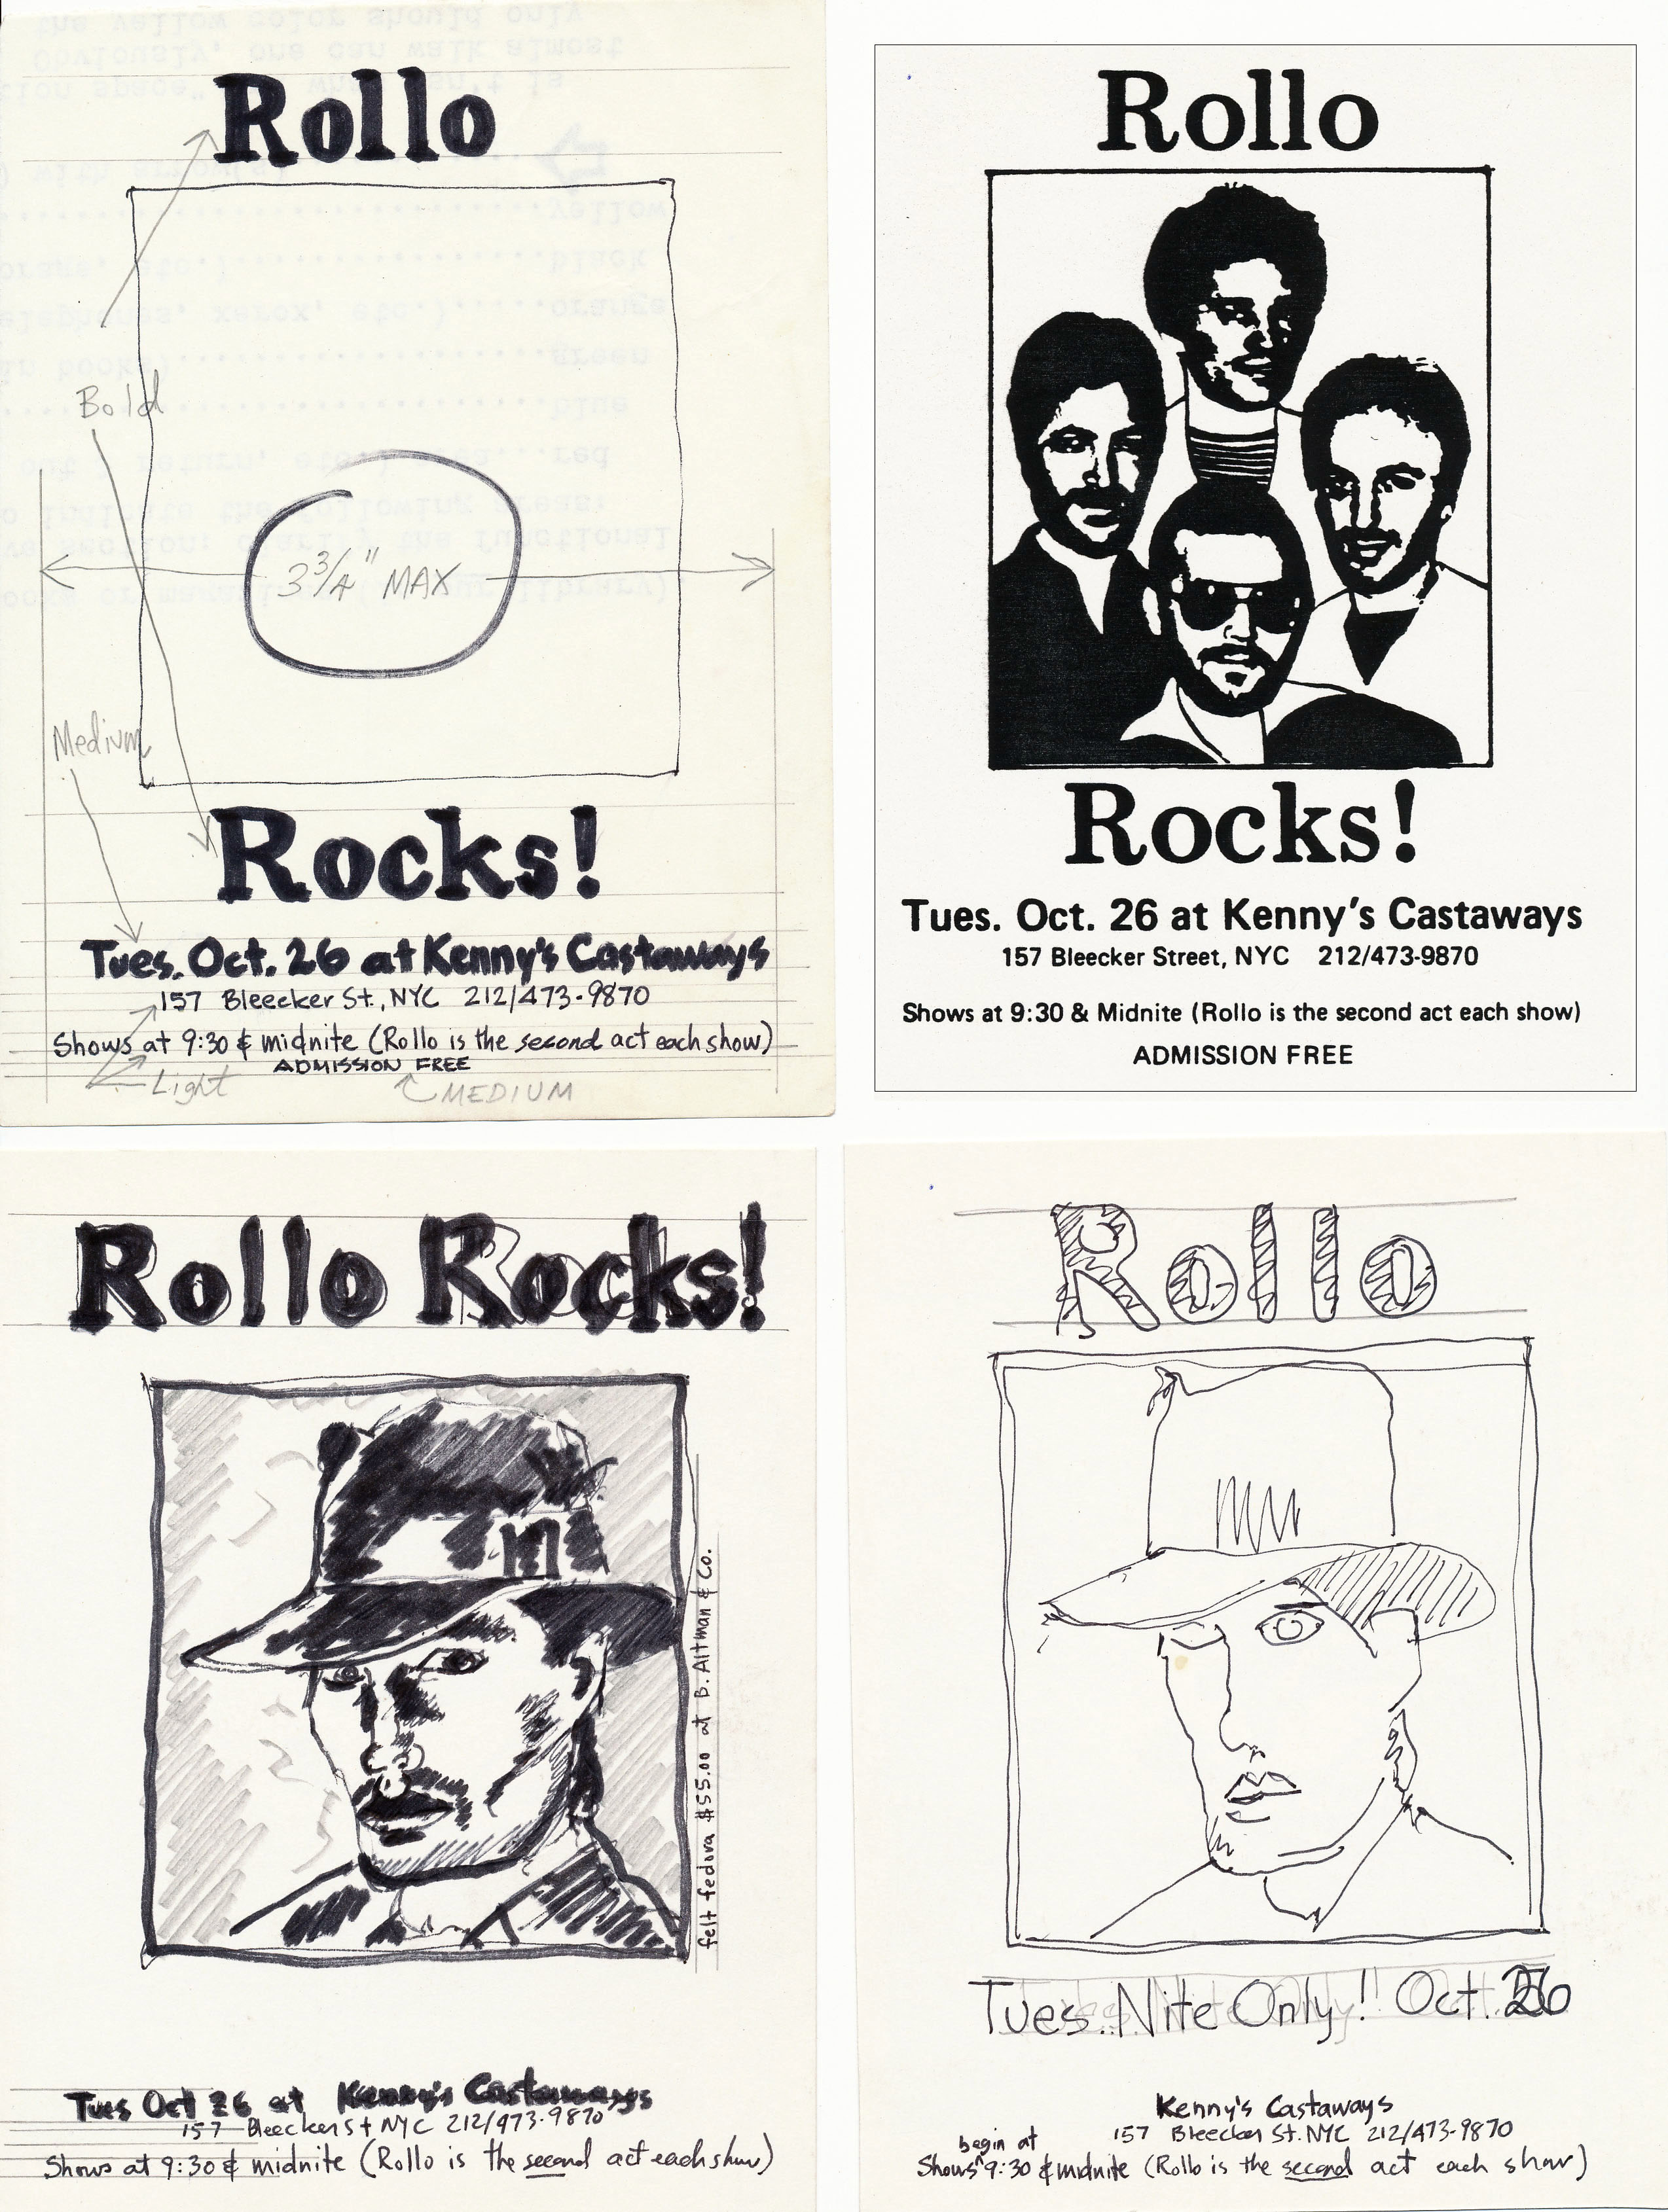 Rollo postcard and draft versions for Kenny's Castaways for 10-26-1982 performance